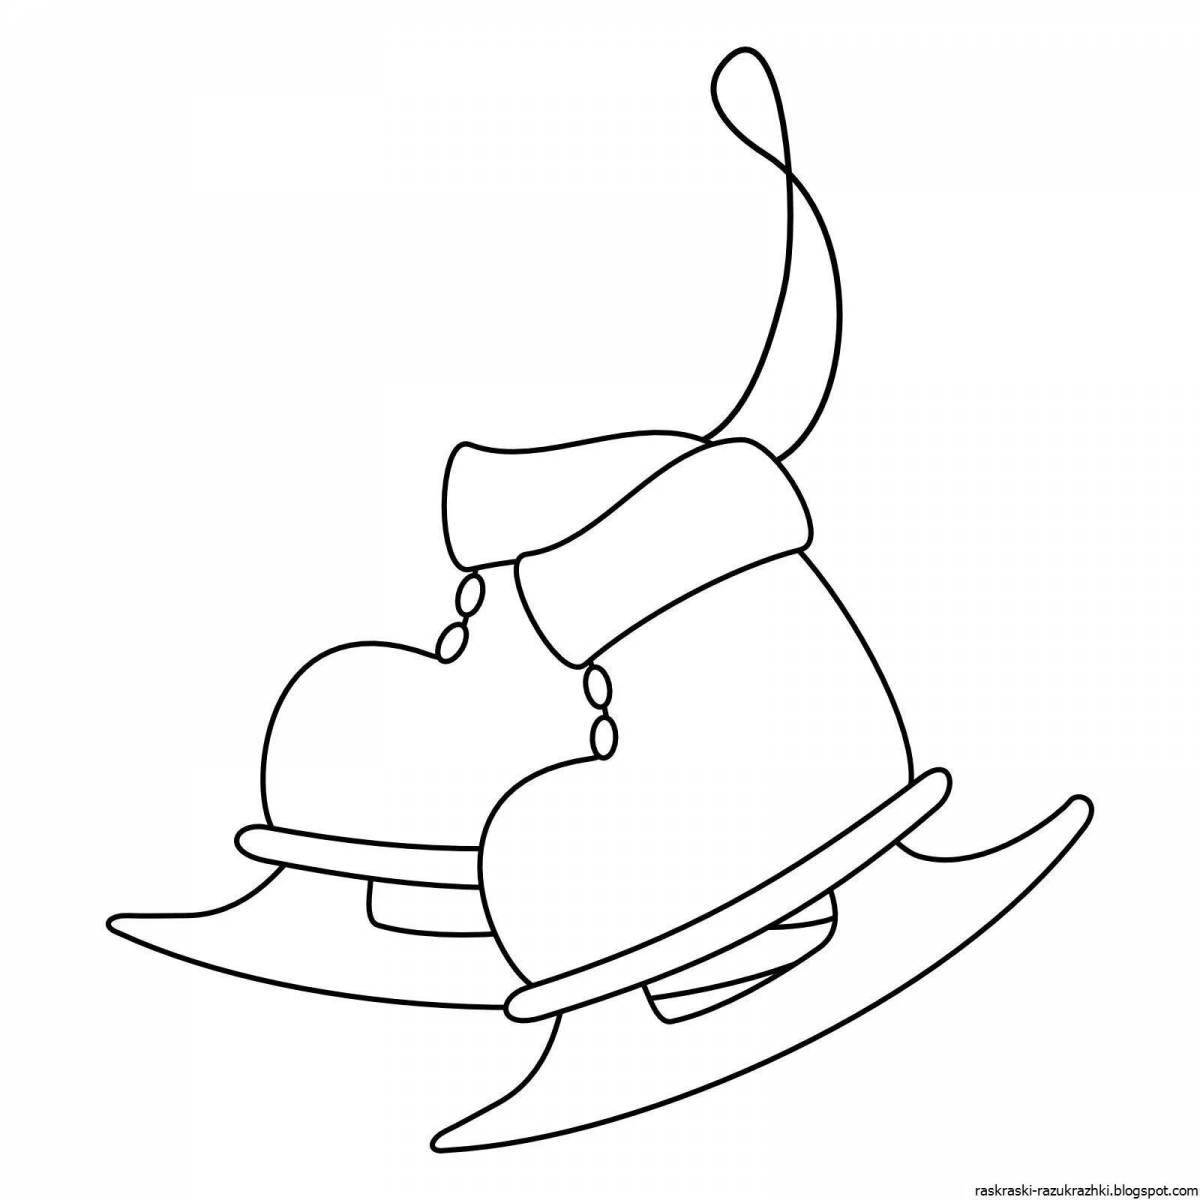 Dynamic skate coloring page